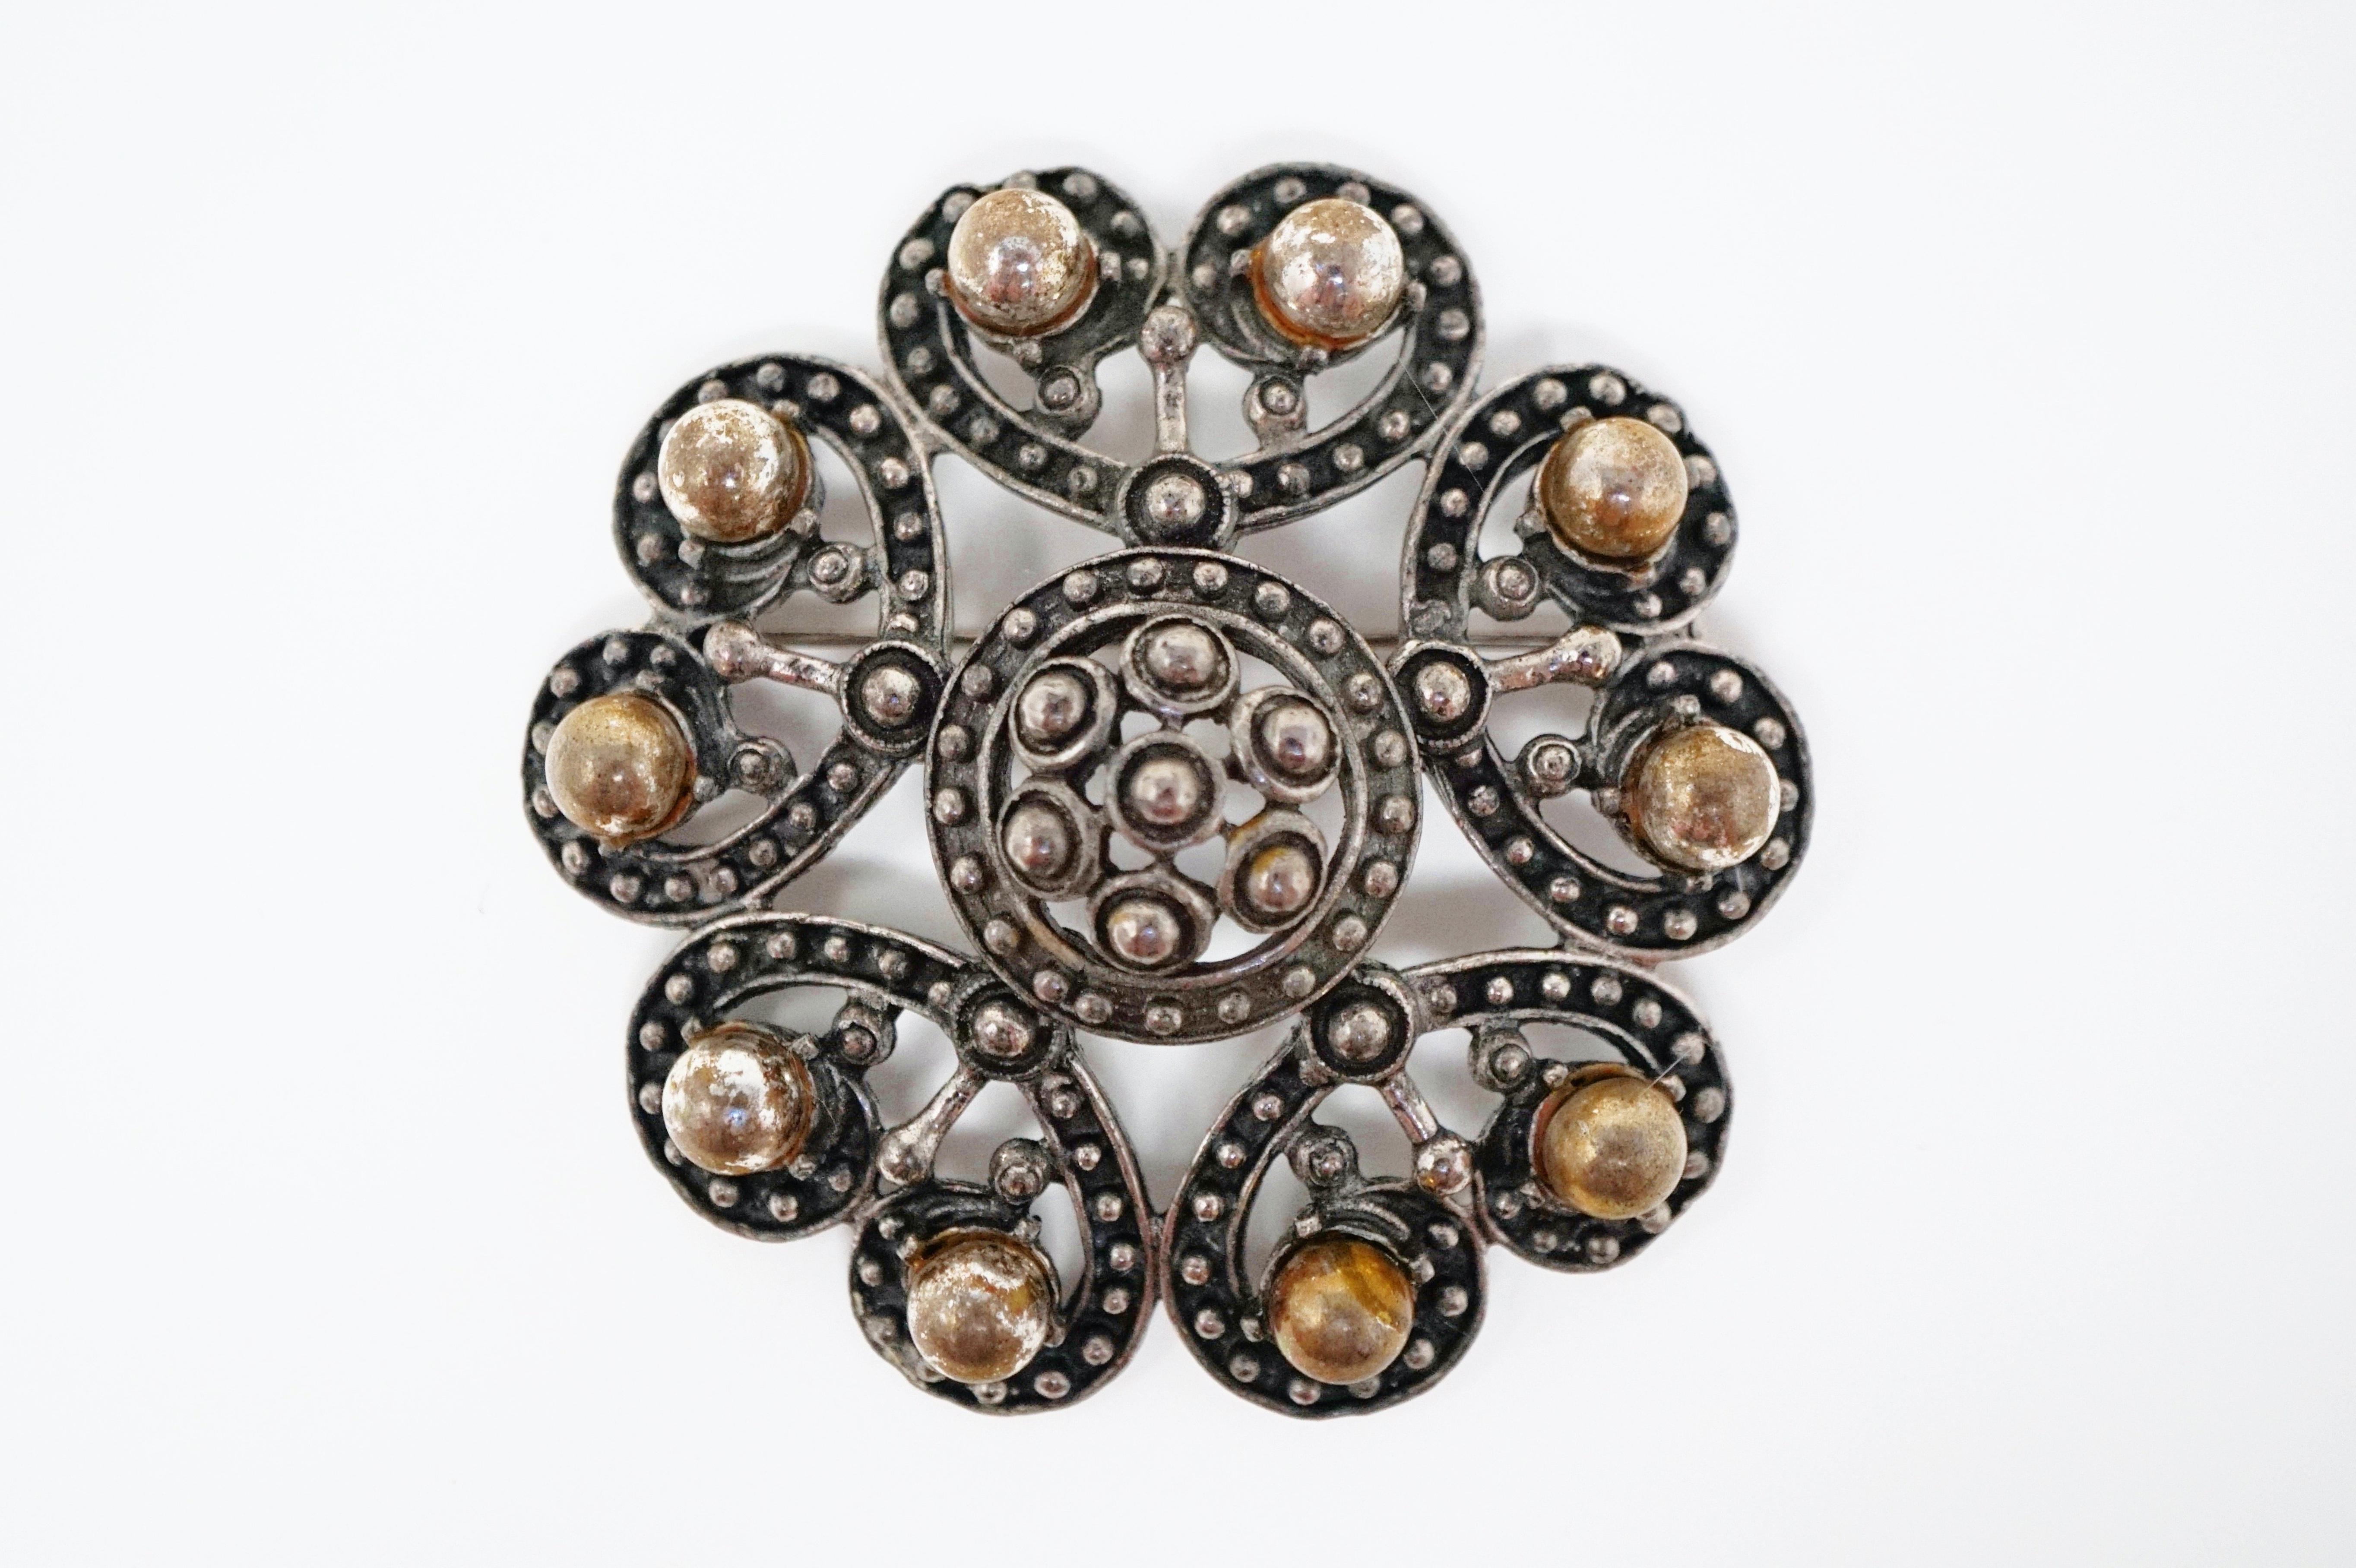 This rare silver tone brooch by Florenza, circa 1960, is an ornate piece inspired by the Victorian era.  The rich gunmetal tone and heft of this piece make it a very unique piece of vintage costume jewelry from the coveted brand Florenza. A